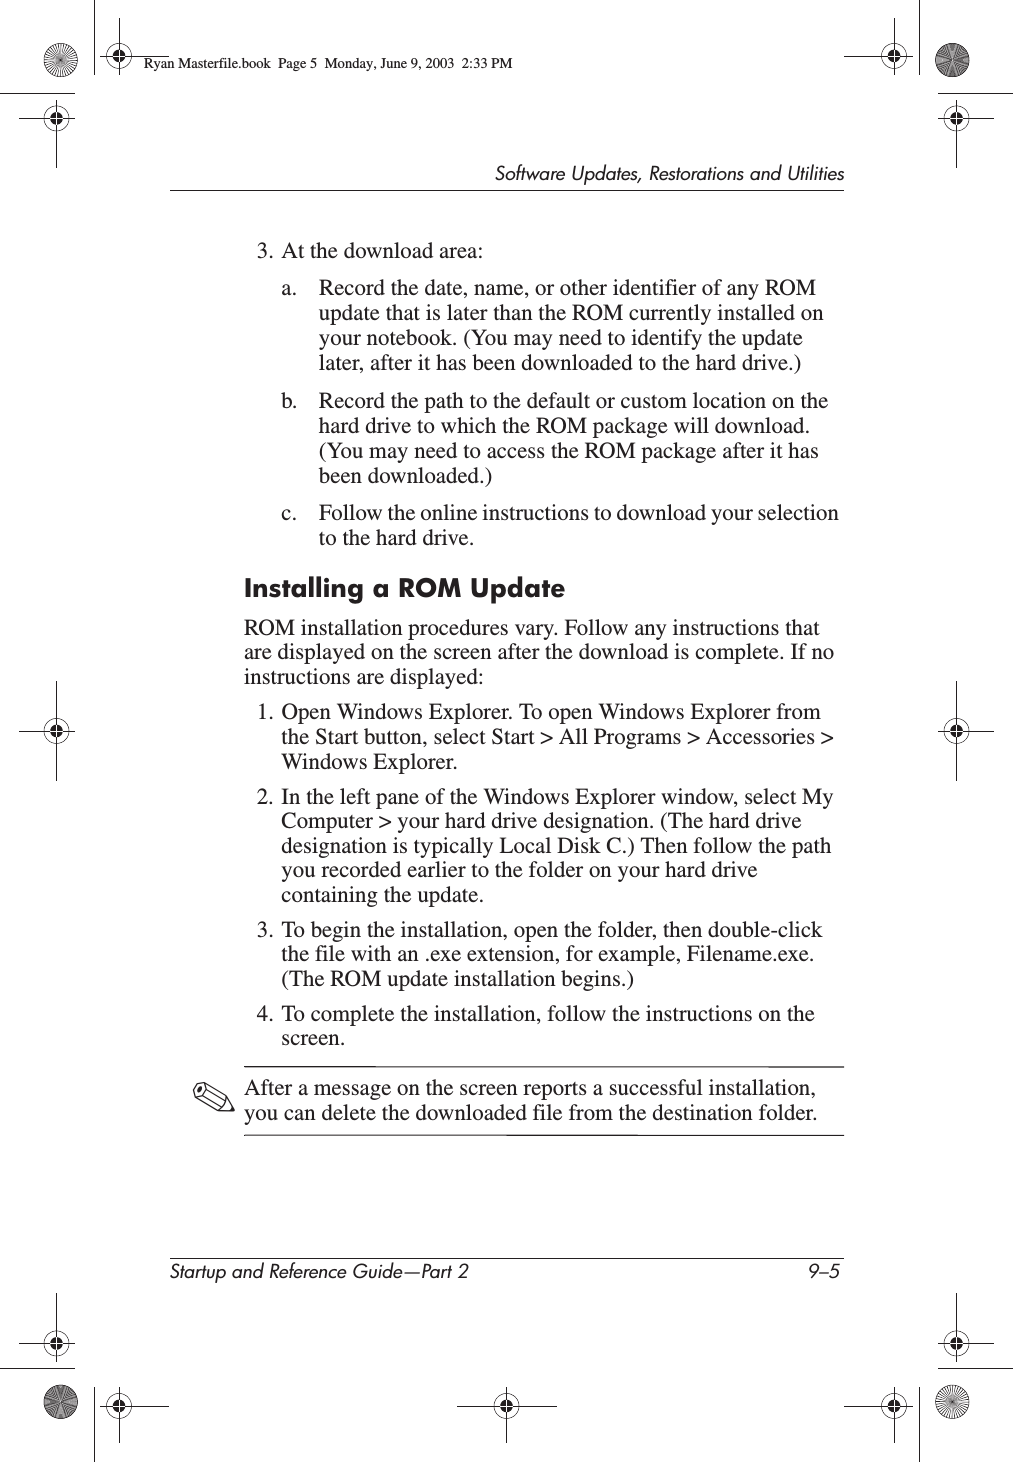 Software Updates, Restorations and UtilitiesStartup and Reference Guide—Part 2 9–53. At the download area:a. Record the date, name, or other identifier of any ROM update that is later than the ROM currently installed on your notebook. (You may need to identify the update later, after it has been downloaded to the hard drive.)b. Record the path to the default or custom location on the hard drive to which the ROM package will download. (You may need to access the ROM package after it has been downloaded.)c. Follow the online instructions to download your selection to the hard drive.Installing a ROM UpdateROM installation procedures vary. Follow any instructions that are displayed on the screen after the download is complete. If no instructions are displayed:1. Open Windows Explorer. To open Windows Explorer from the Start button, select Start &gt; All Programs &gt; Accessories &gt; Windows Explorer.2. In the left pane of the Windows Explorer window, select My Computer &gt; your hard drive designation. (The hard drive designation is typically Local Disk C.) Then follow the path you recorded earlier to the folder on your hard drive containing the update.3. To begin the installation, open the folder, then double-click the file with an .exe extension, for example, Filename.exe. (The ROM update installation begins.)4. To complete the installation, follow the instructions on the screen.✎After a message on the screen reports a successful installation, you can delete the downloaded file from the destination folder.Ryan Masterfile.book  Page 5  Monday, June 9, 2003  2:33 PM